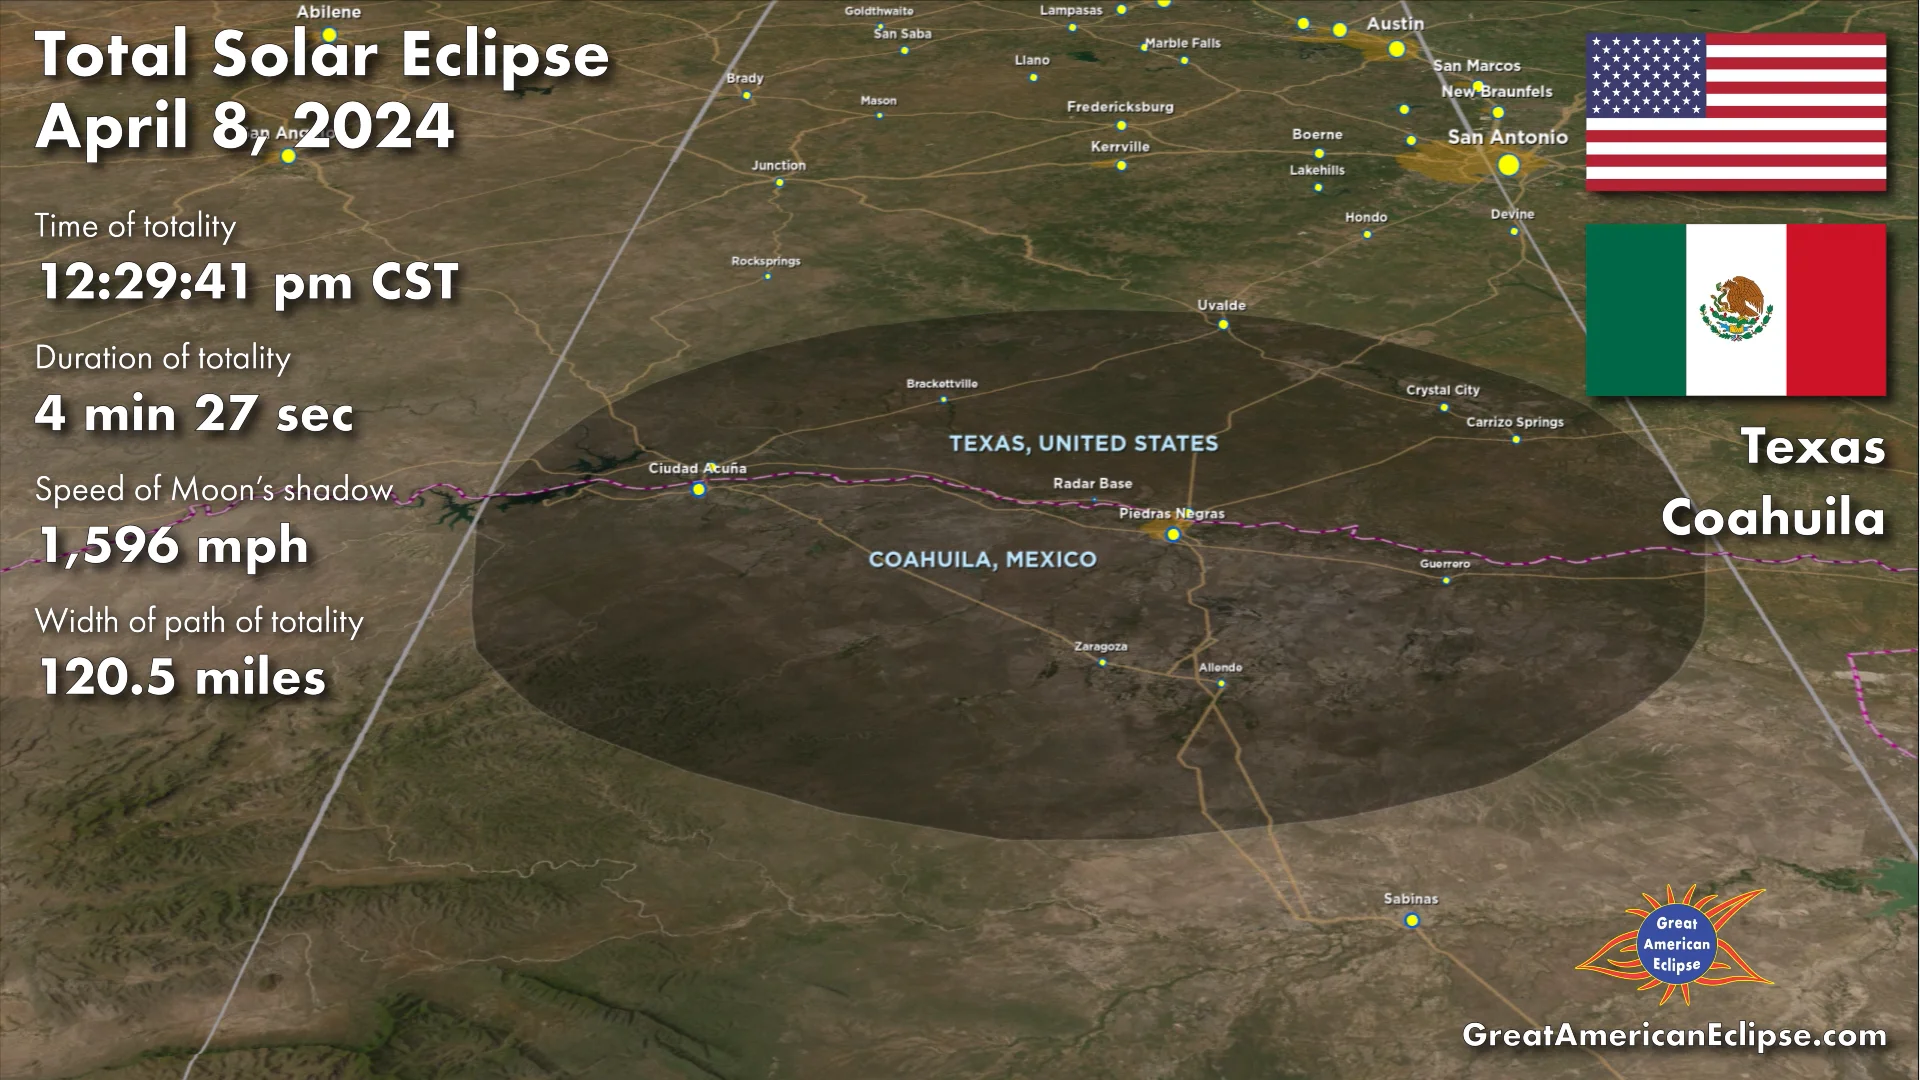 Flying over Texas for the Total Solar Eclipse of April 8, 2024 on Vimeo